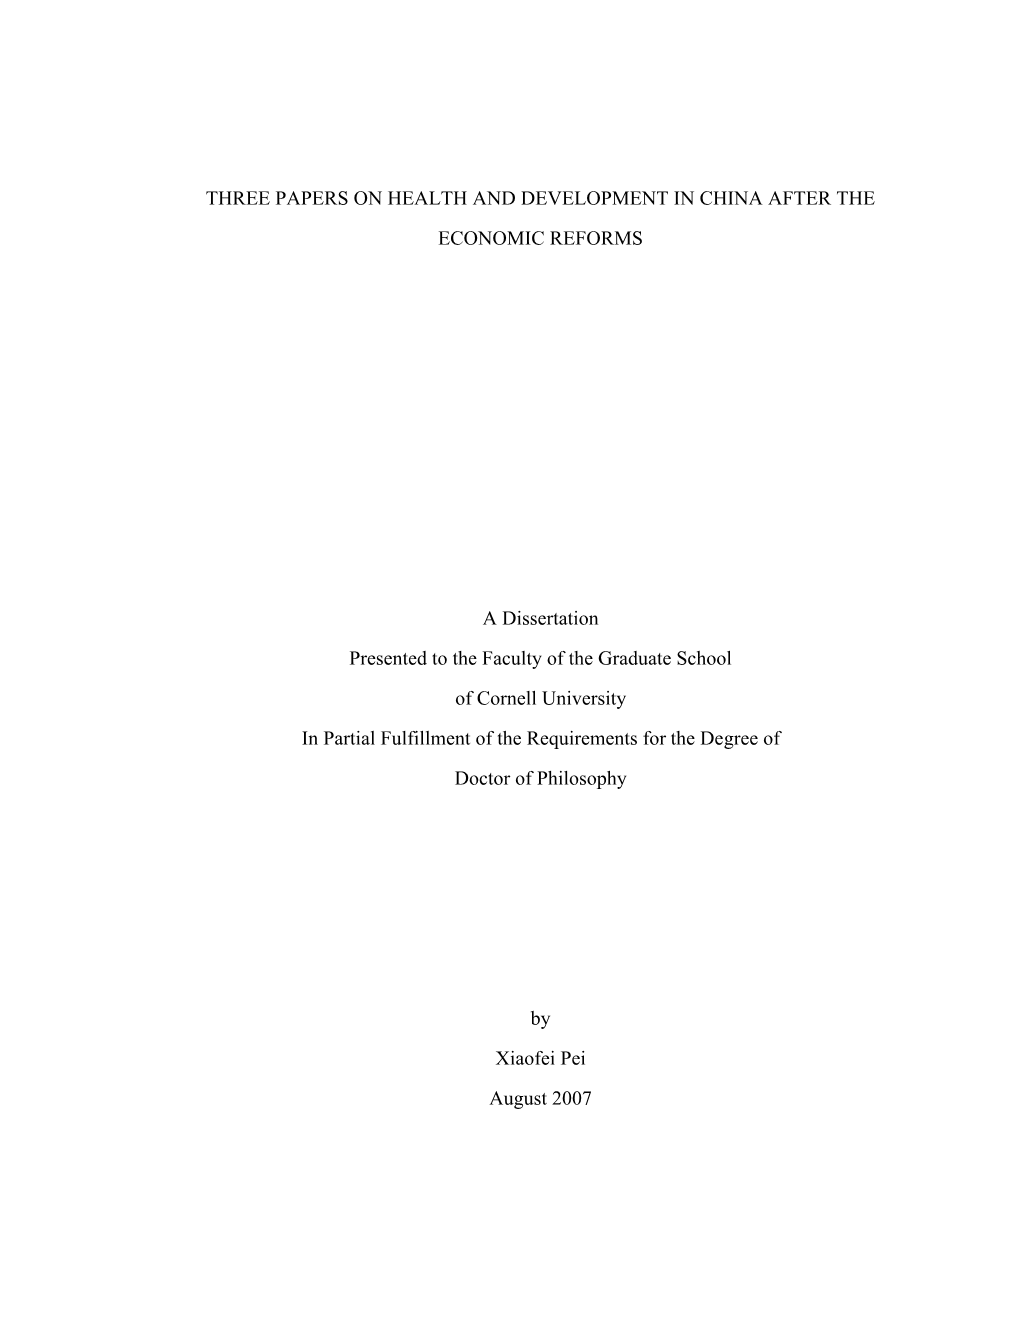 THREE PAPERS on HEALTH and DEVELOPMENT in CHINA AFTER the ECONOMIC REFORMS a Dissertation Presented to the Faculty of the Gradua